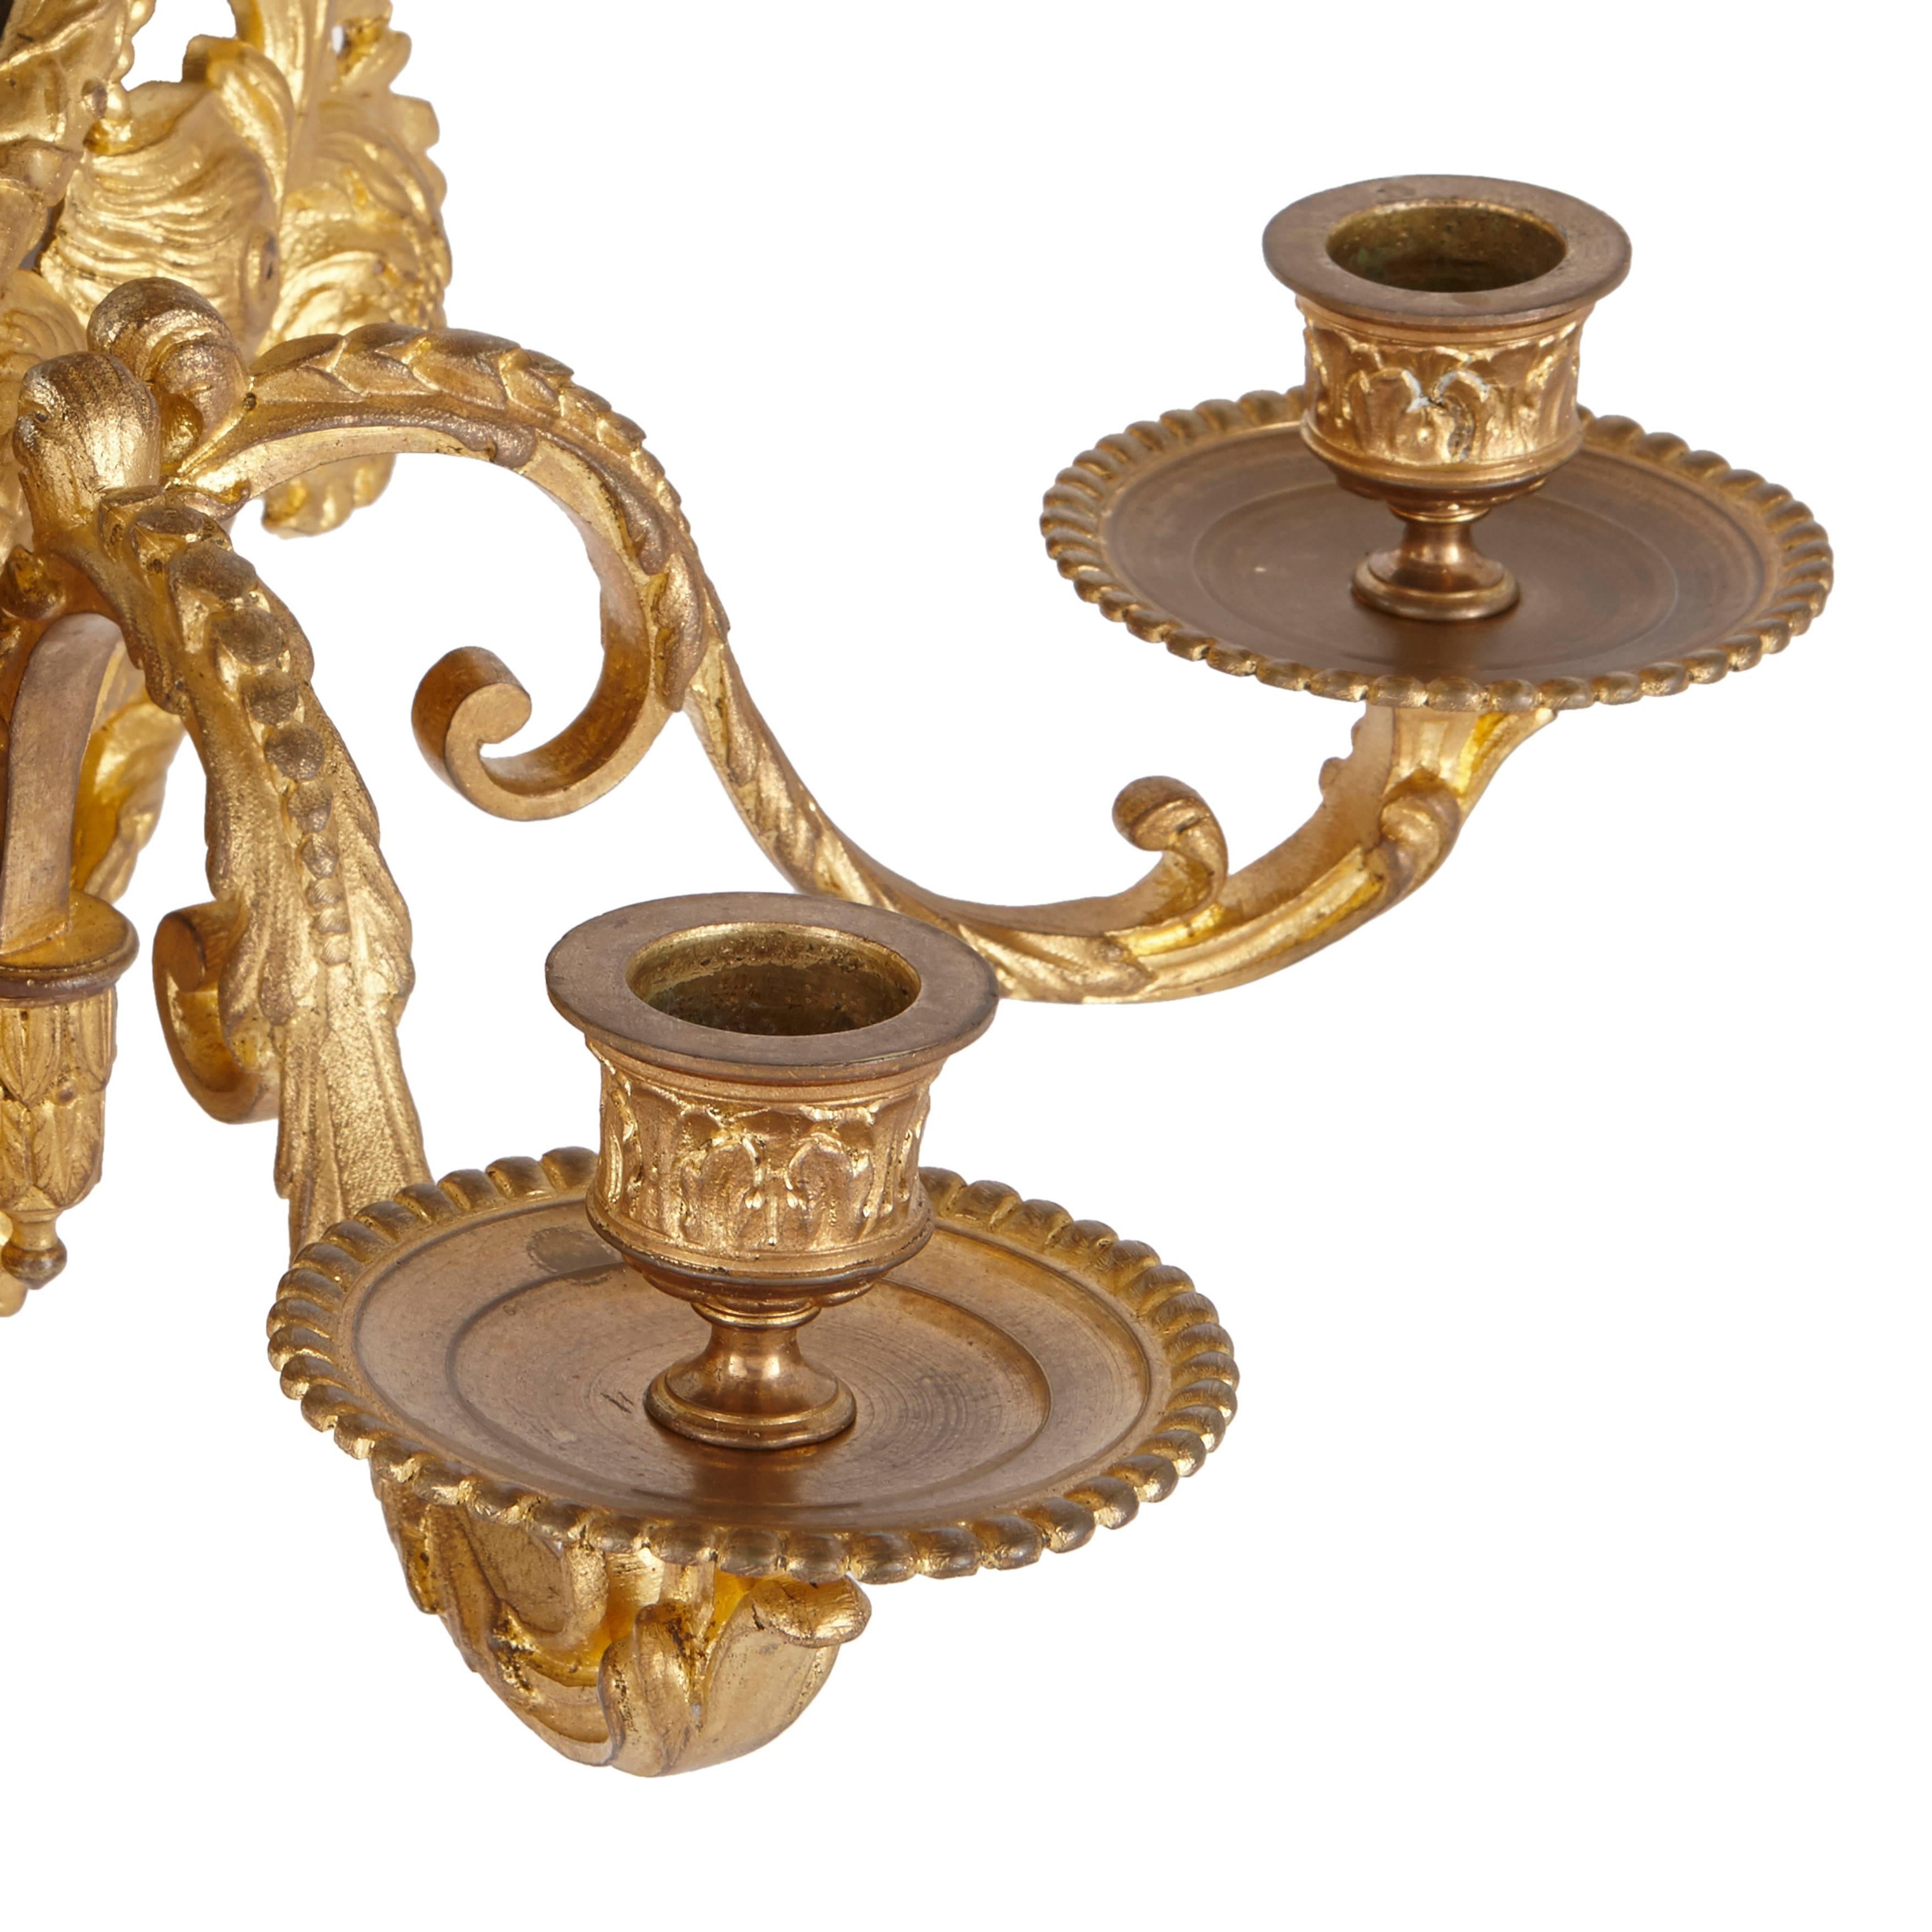 Two ormolu wall lights decorated in the ornate and florid Rococo style, each featuring central circular mirrors and two lighting branches.